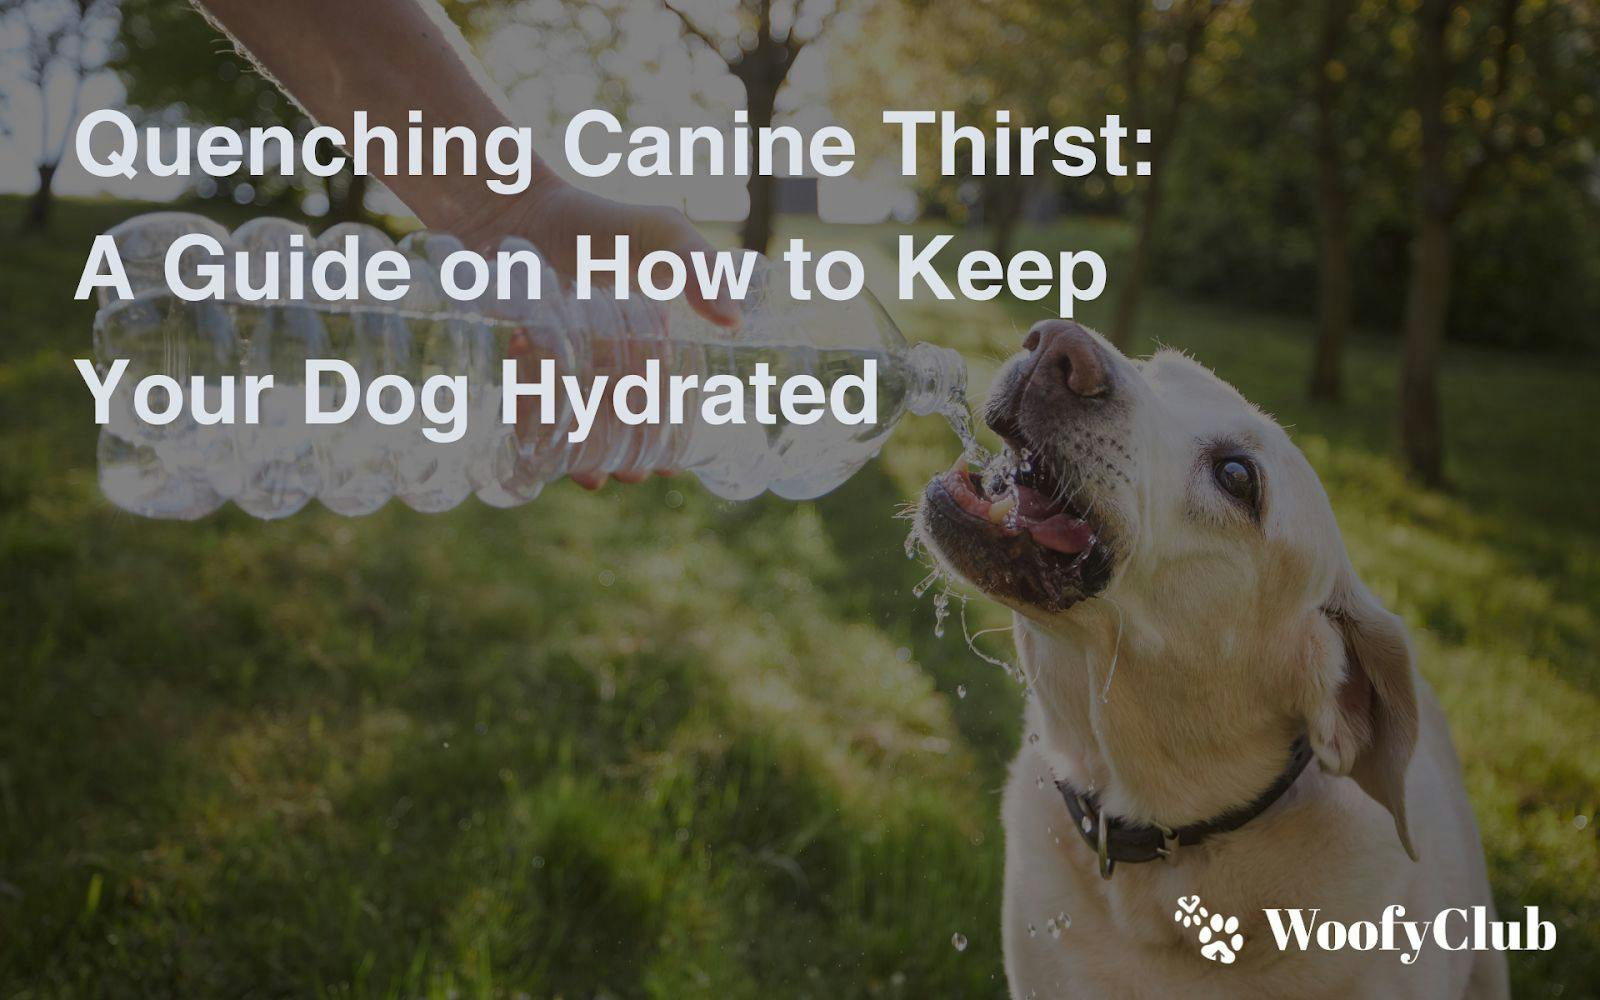 Quenching Canine Thirst: A Guide On How To Keep Your Dog Hydrated